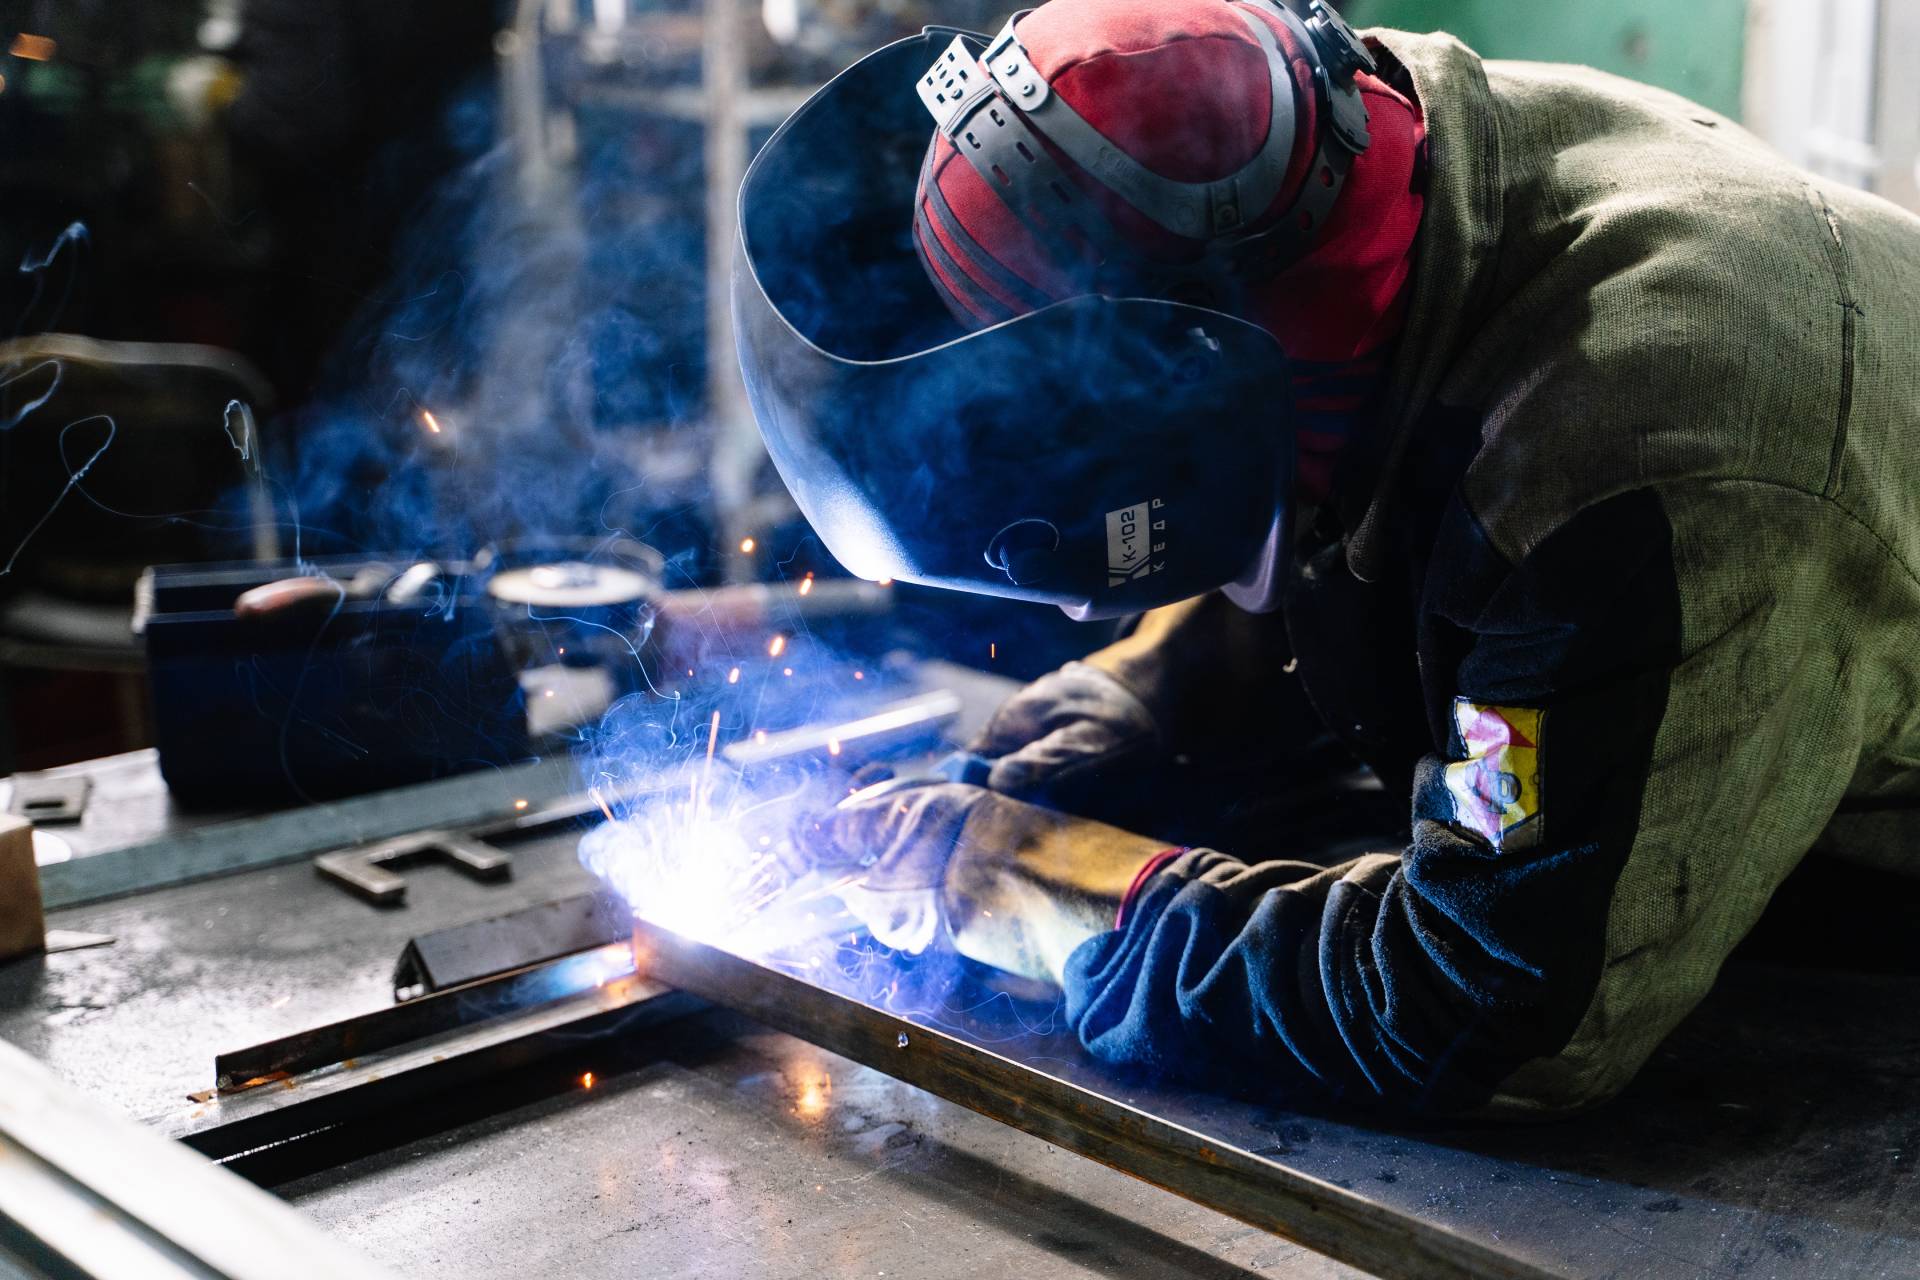 HSE Following up with spot checks after safety alert in 2019 on welding